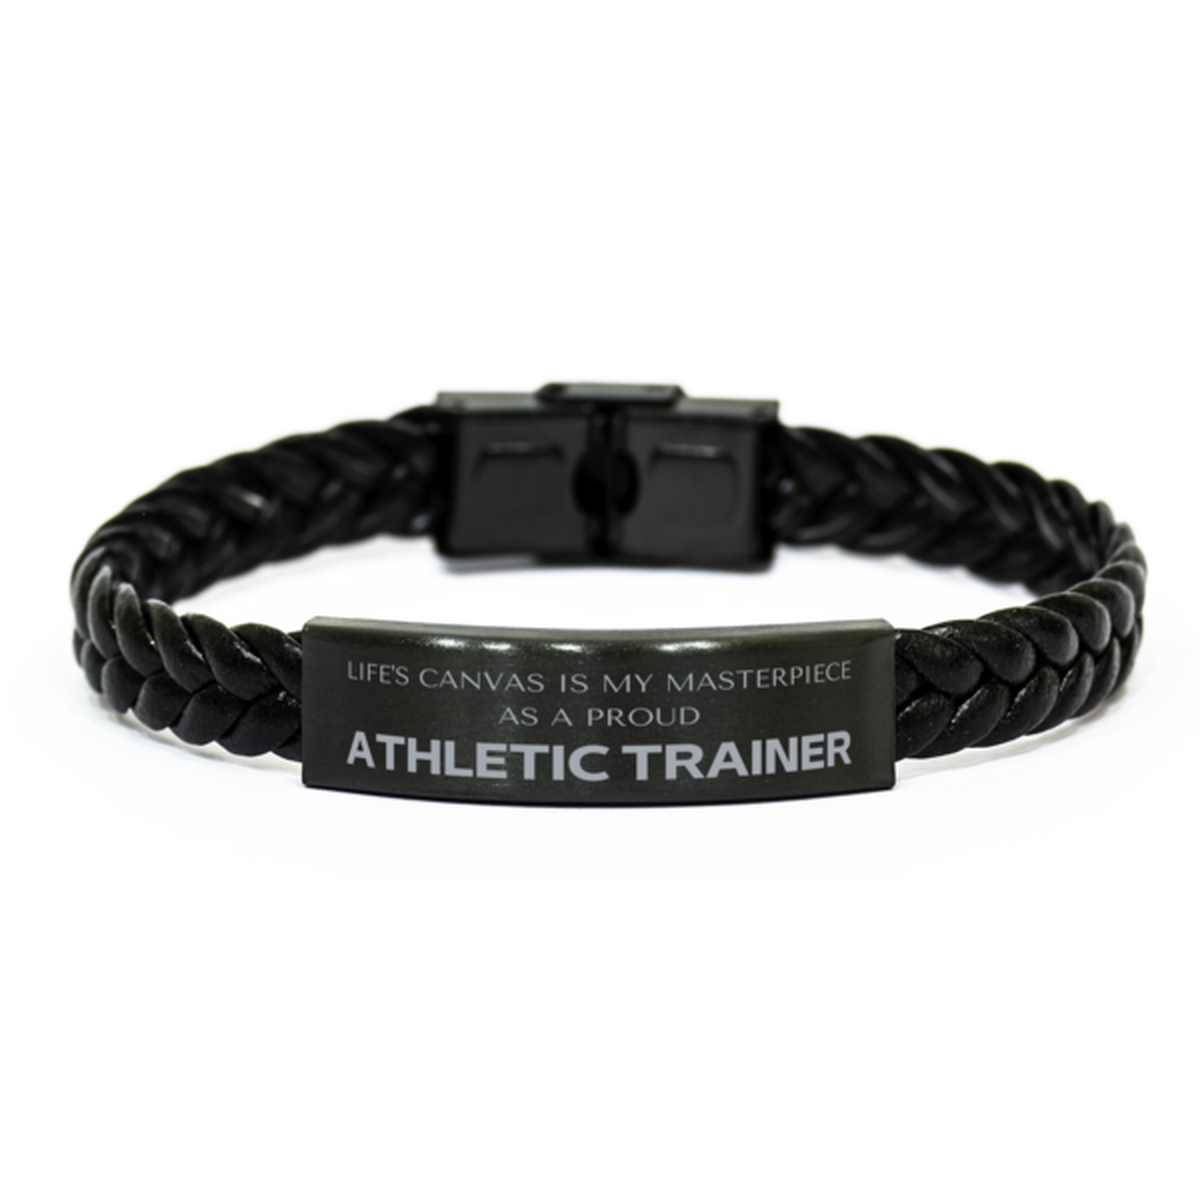 Proud Athletic Trainer Gifts, Life's canvas is my masterpiece, Epic Birthday Christmas Unique Braided Leather Bracelet For Athletic Trainer, Coworkers, Men, Women, Friends